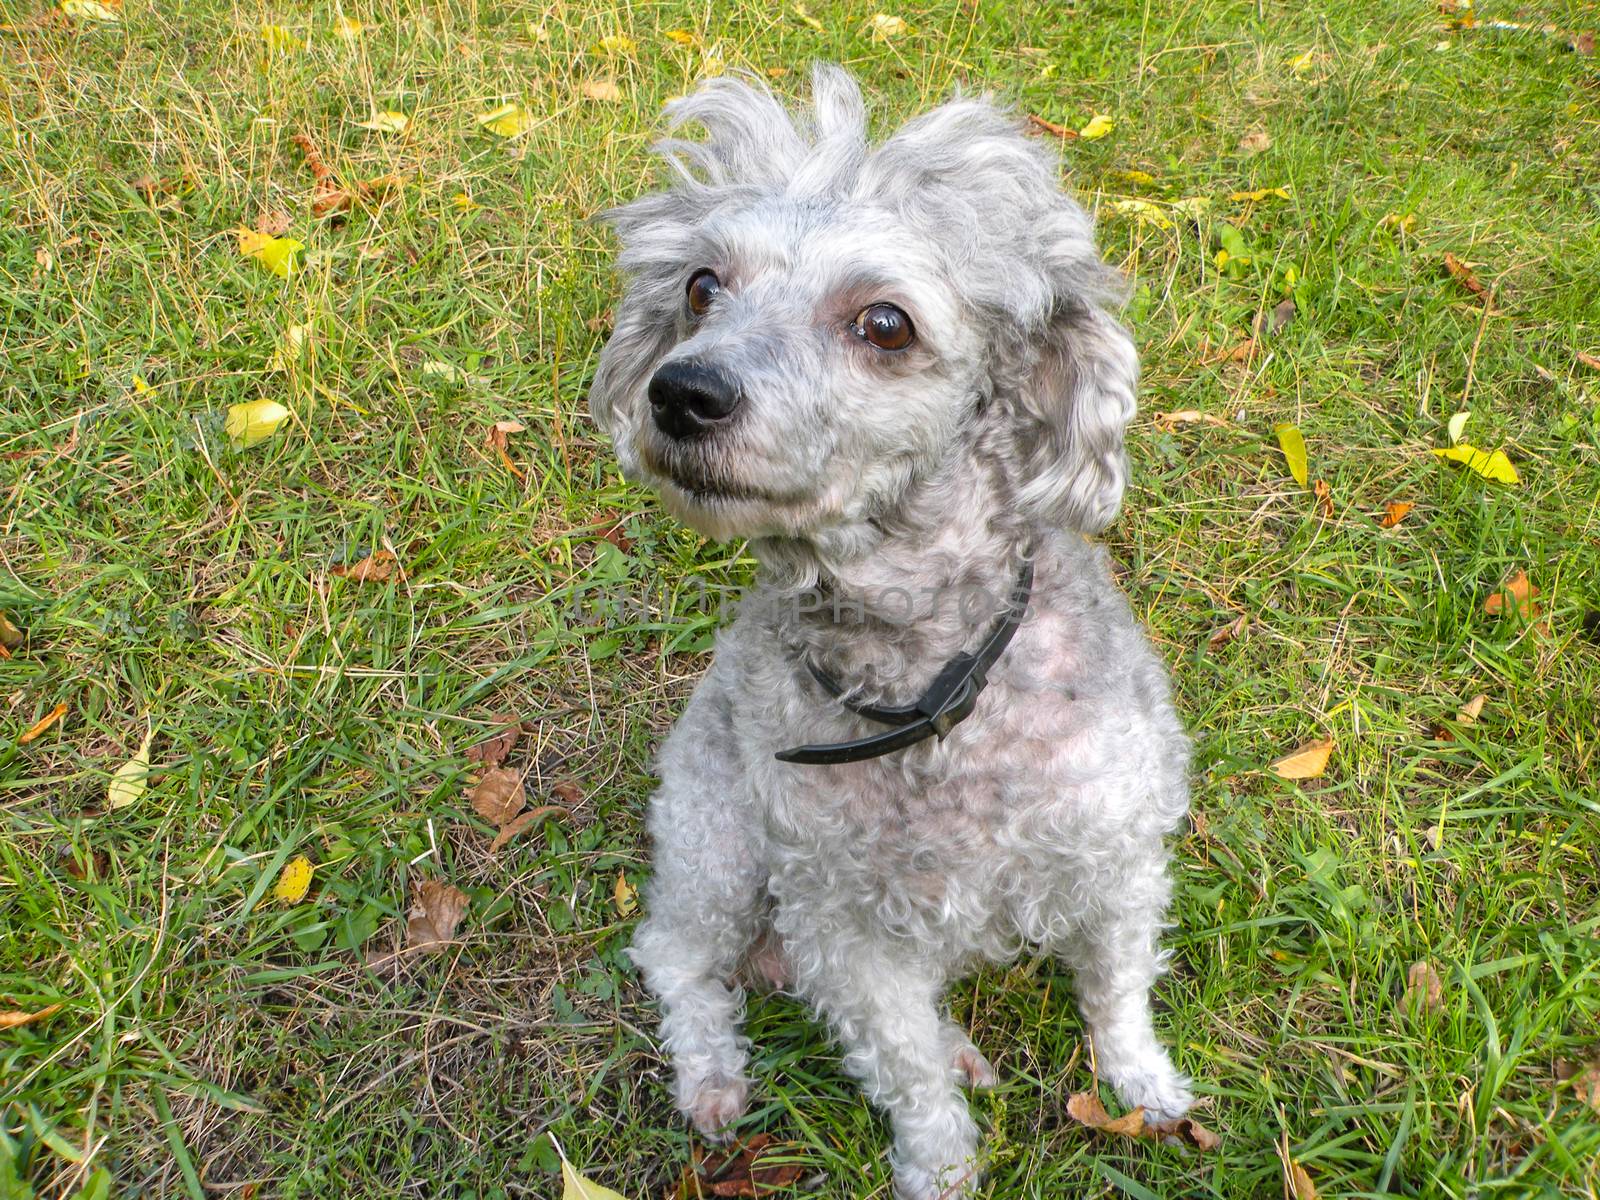 Ashen trimmed poodle on the grass. funny dog with short hair by mtx